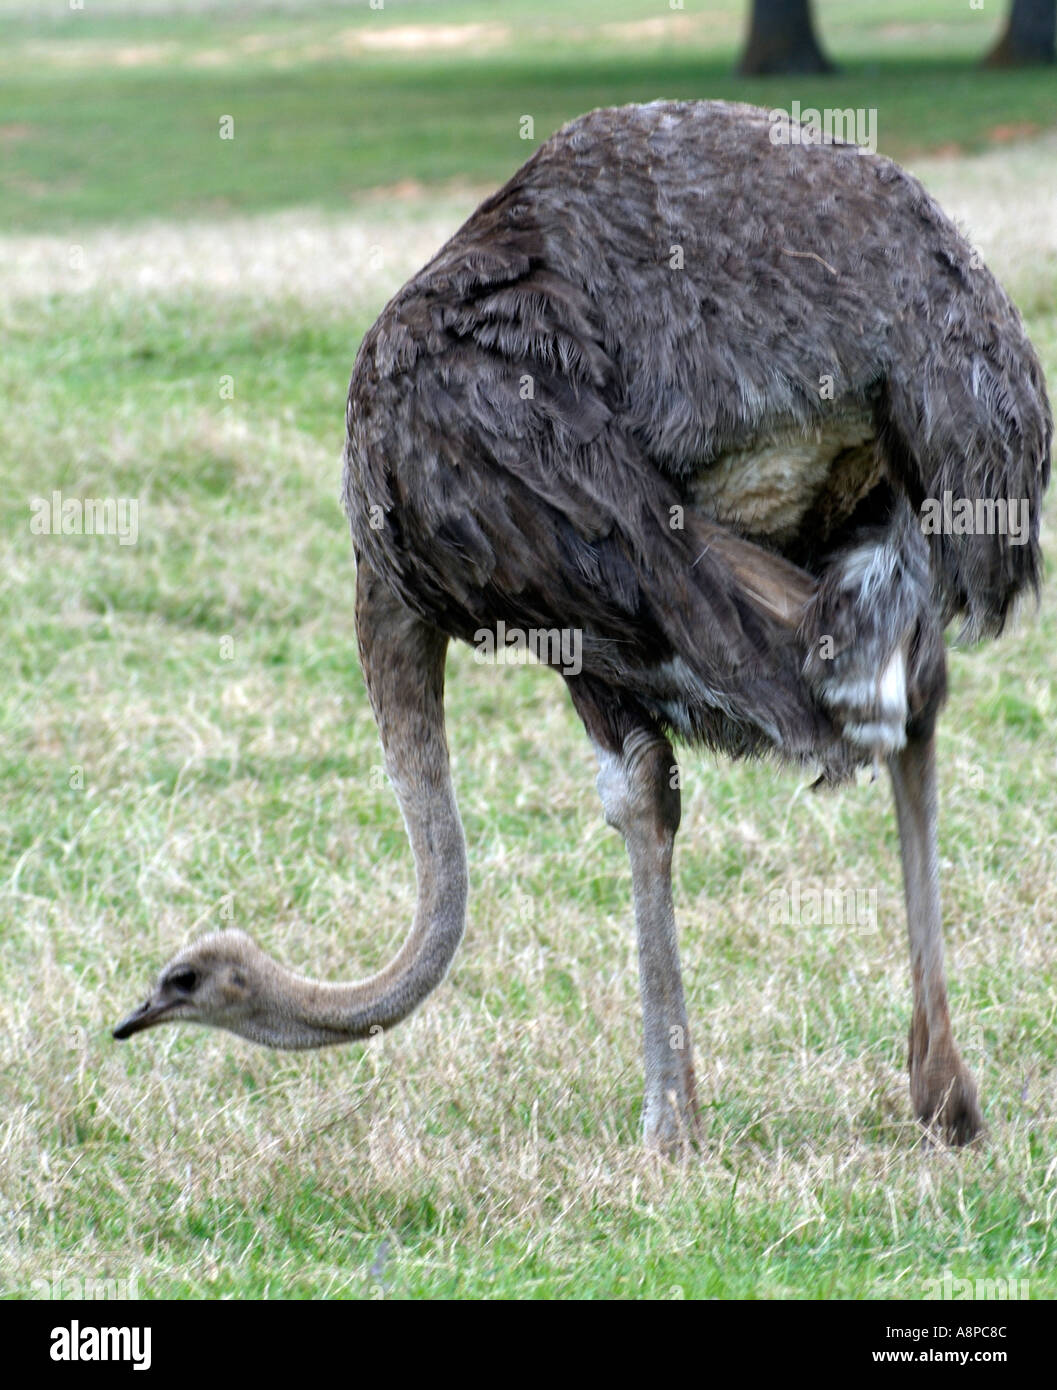 Emu pecking grass to find food Stock Photo